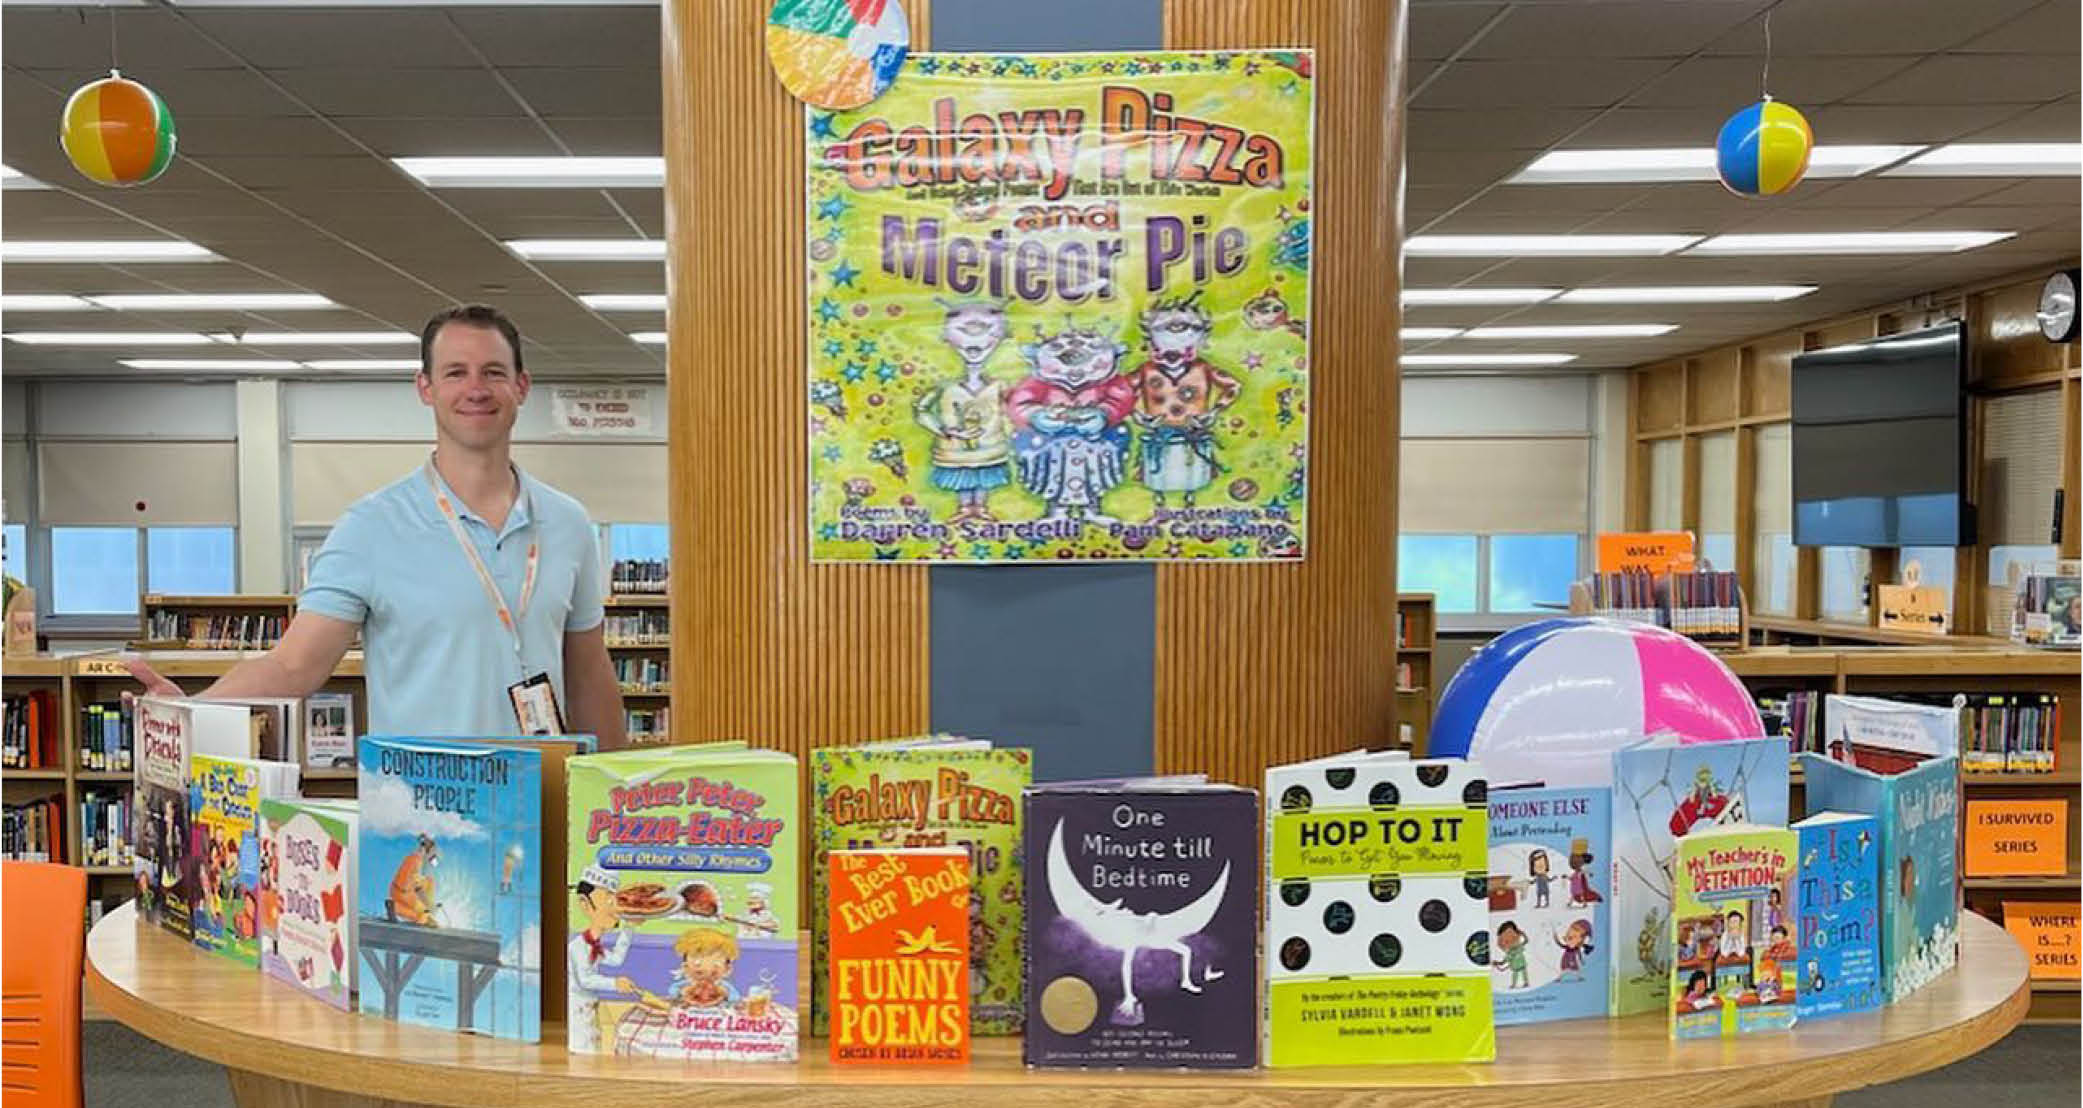 photo of Darren Sardelli standing in a library surrounded by children's books